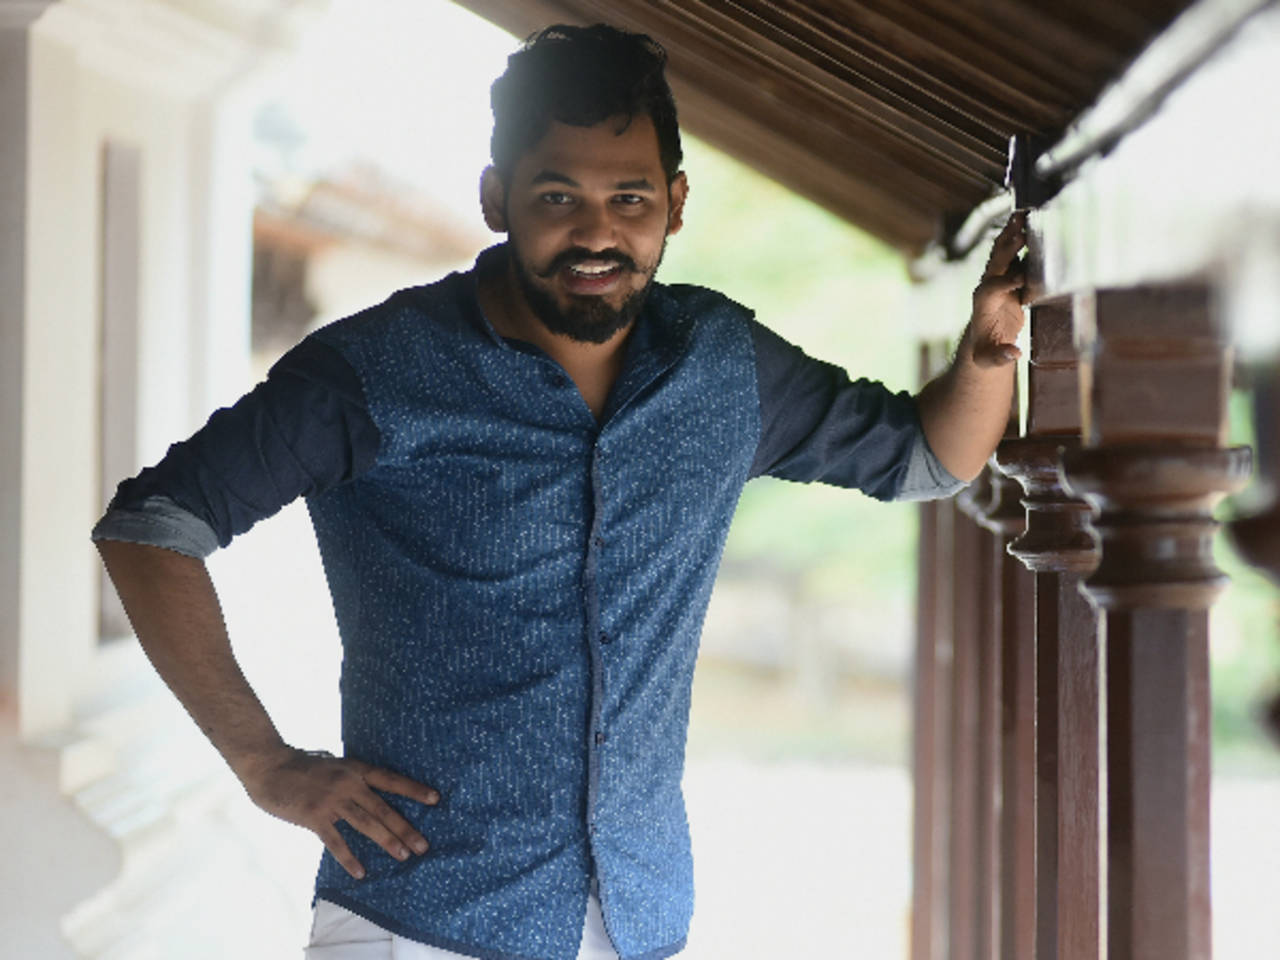 Hiphop Tamizha Special Song, Hiphop Tamizha Songs, Hiphop Tamizha Hits,  Tamil MP3 songs download